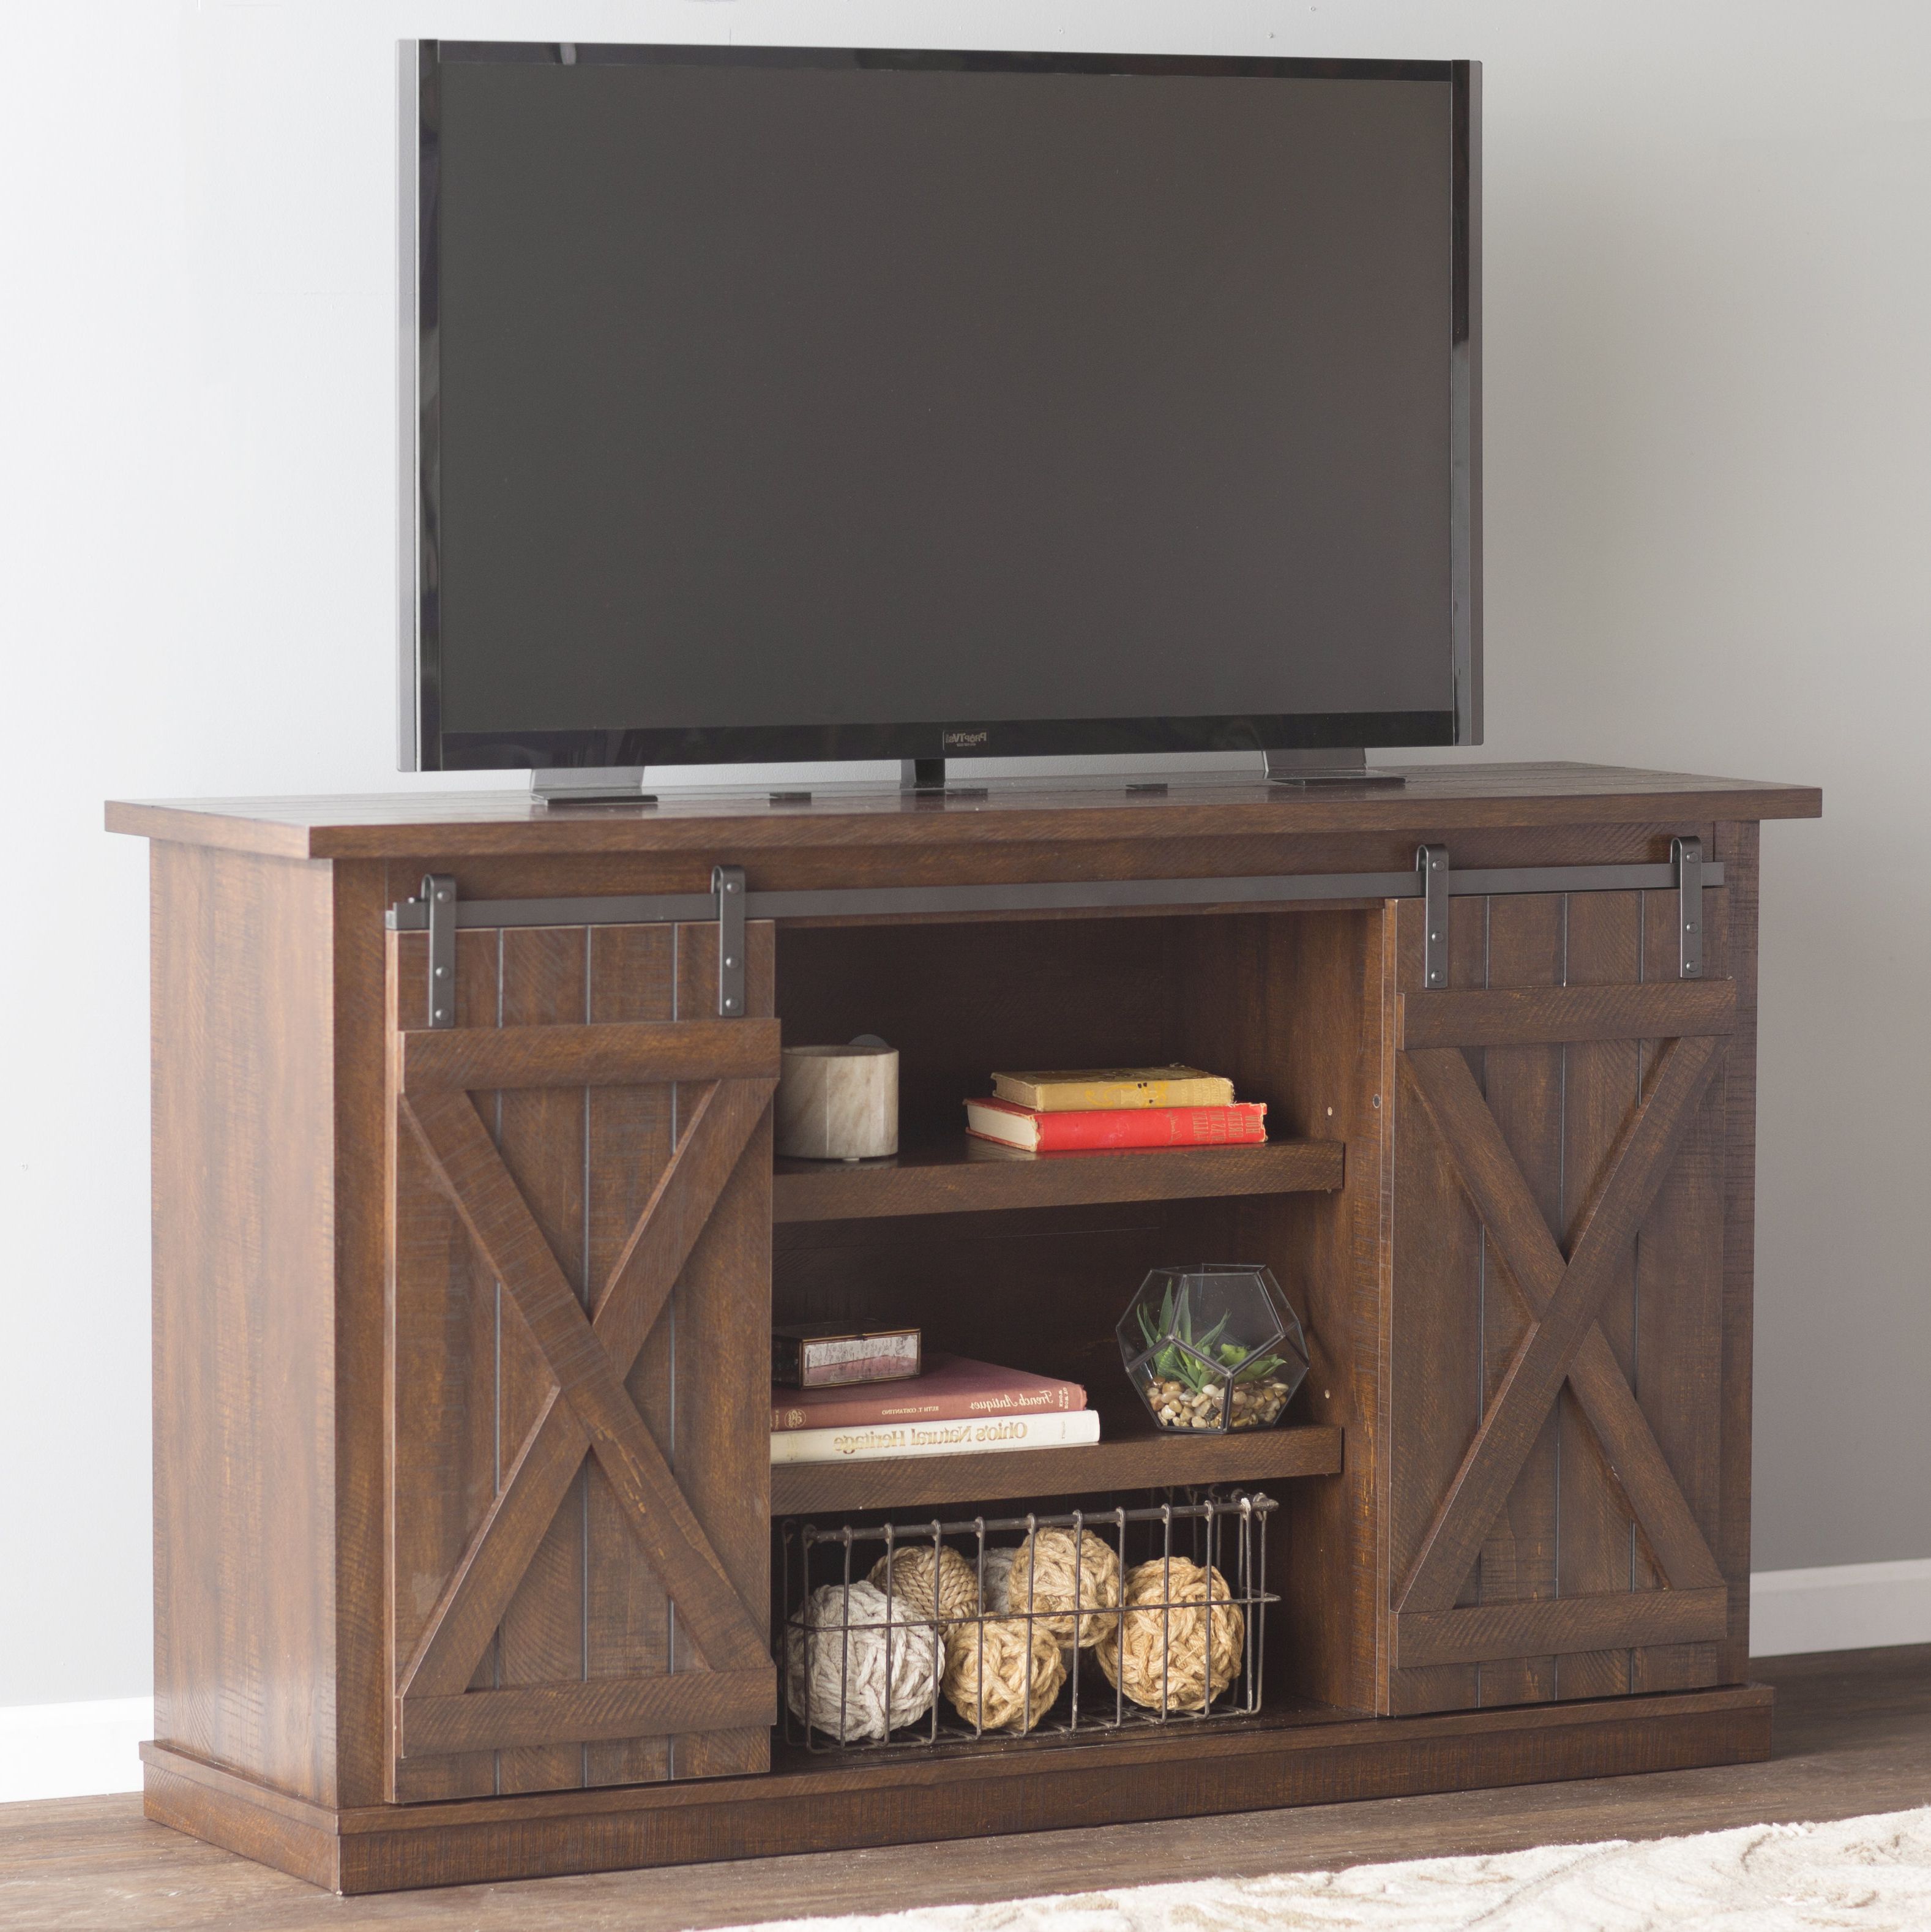 Best And Newest Tv Stands & Entertainment Centers You'll Love Regarding Wood Tv Floor Stands (View 7 of 20)